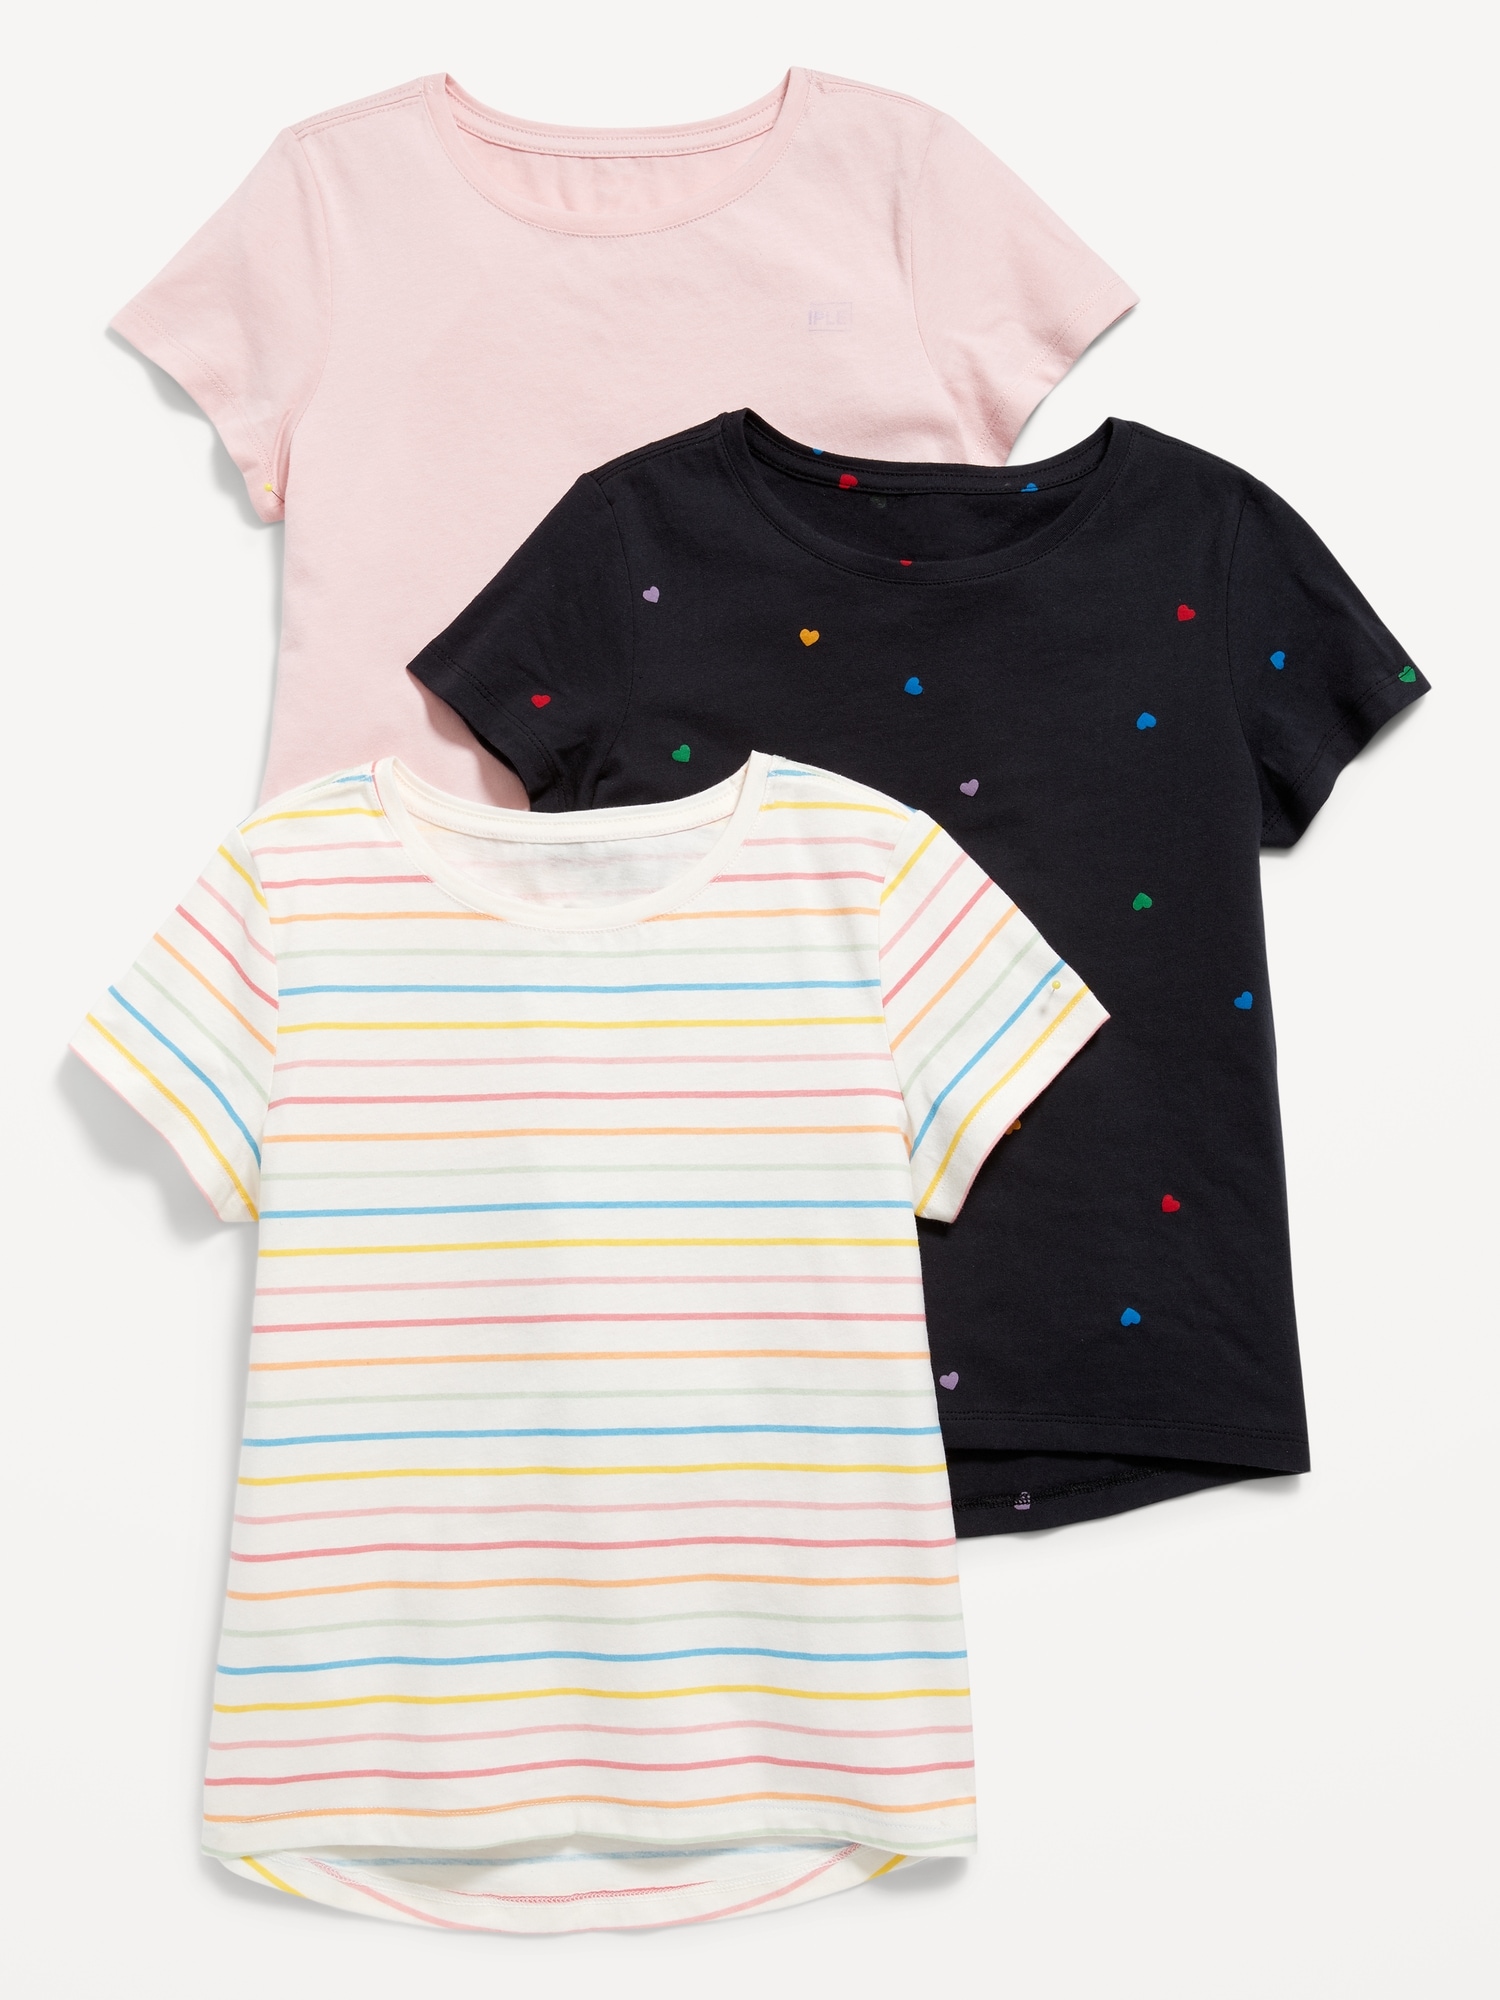 Softest Printed T-Shirt 3-Pack for Girls | Old Navy